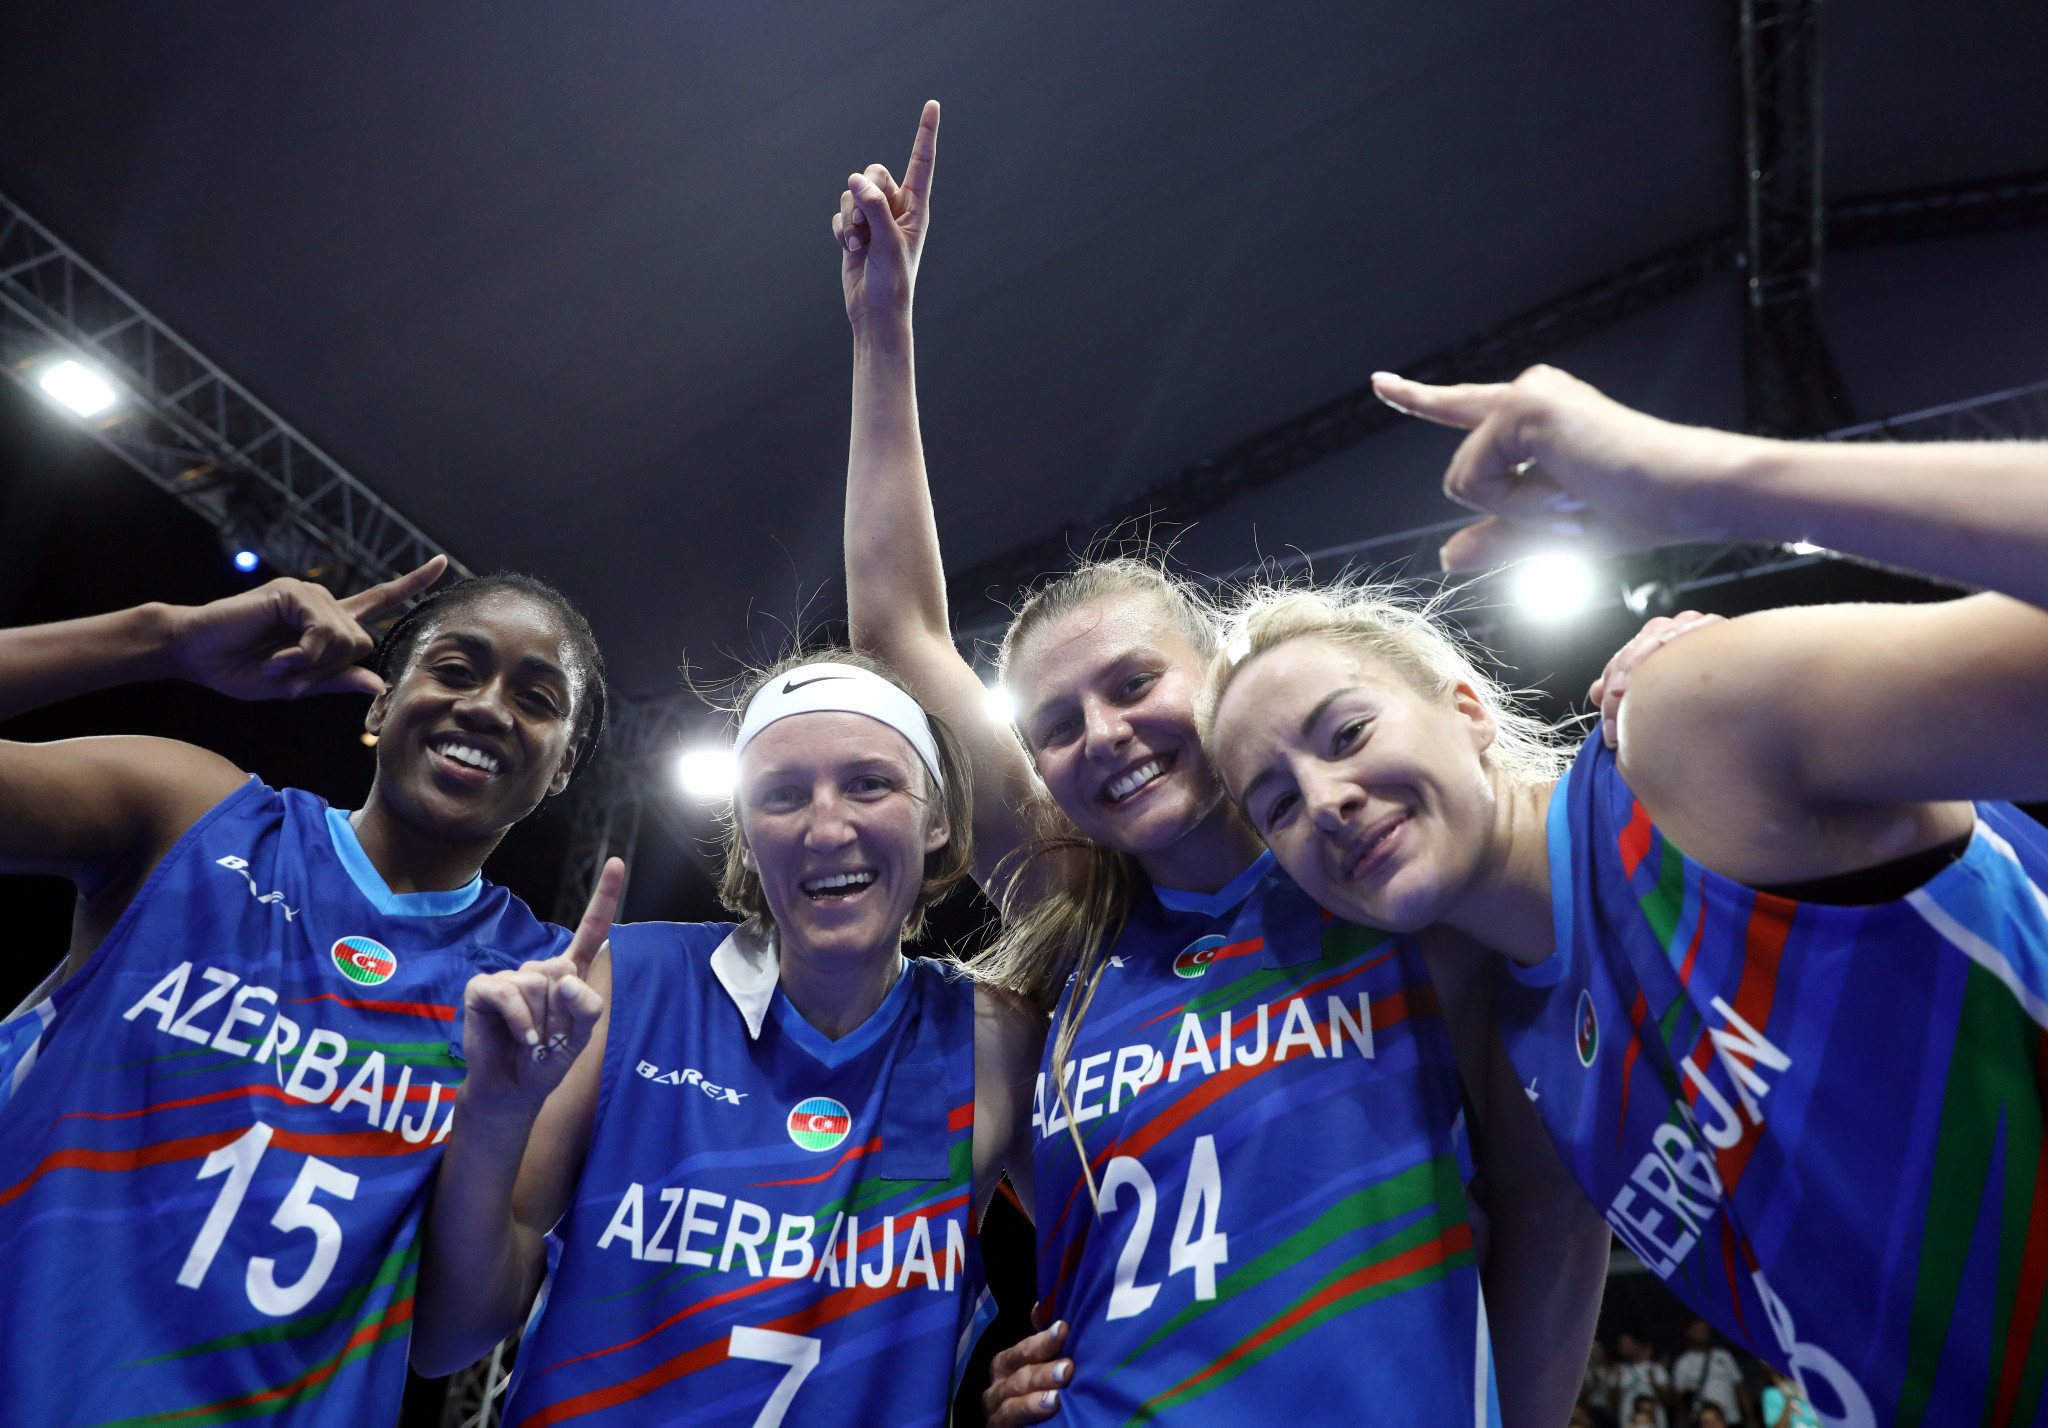 Azerbaijan's players celebrate after cruising to victory over Mali in the women's 3x3 basketball final ©Konya 2021